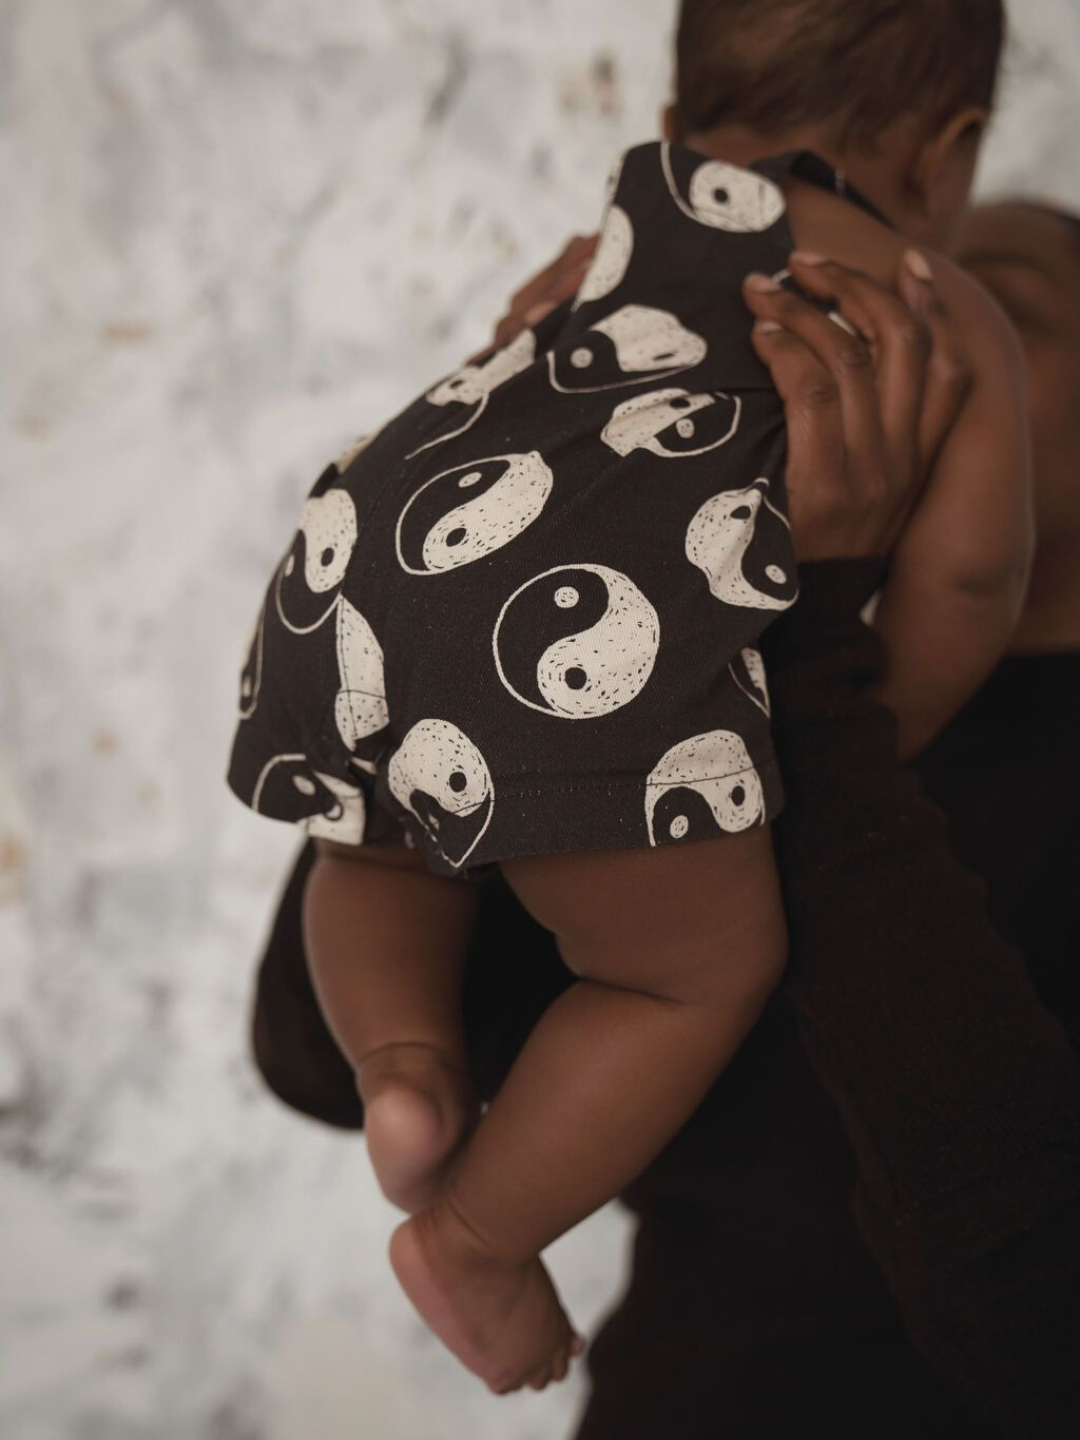 A back view of black overalls with a yin and yang pattern all over on a child being picked up by their parent.